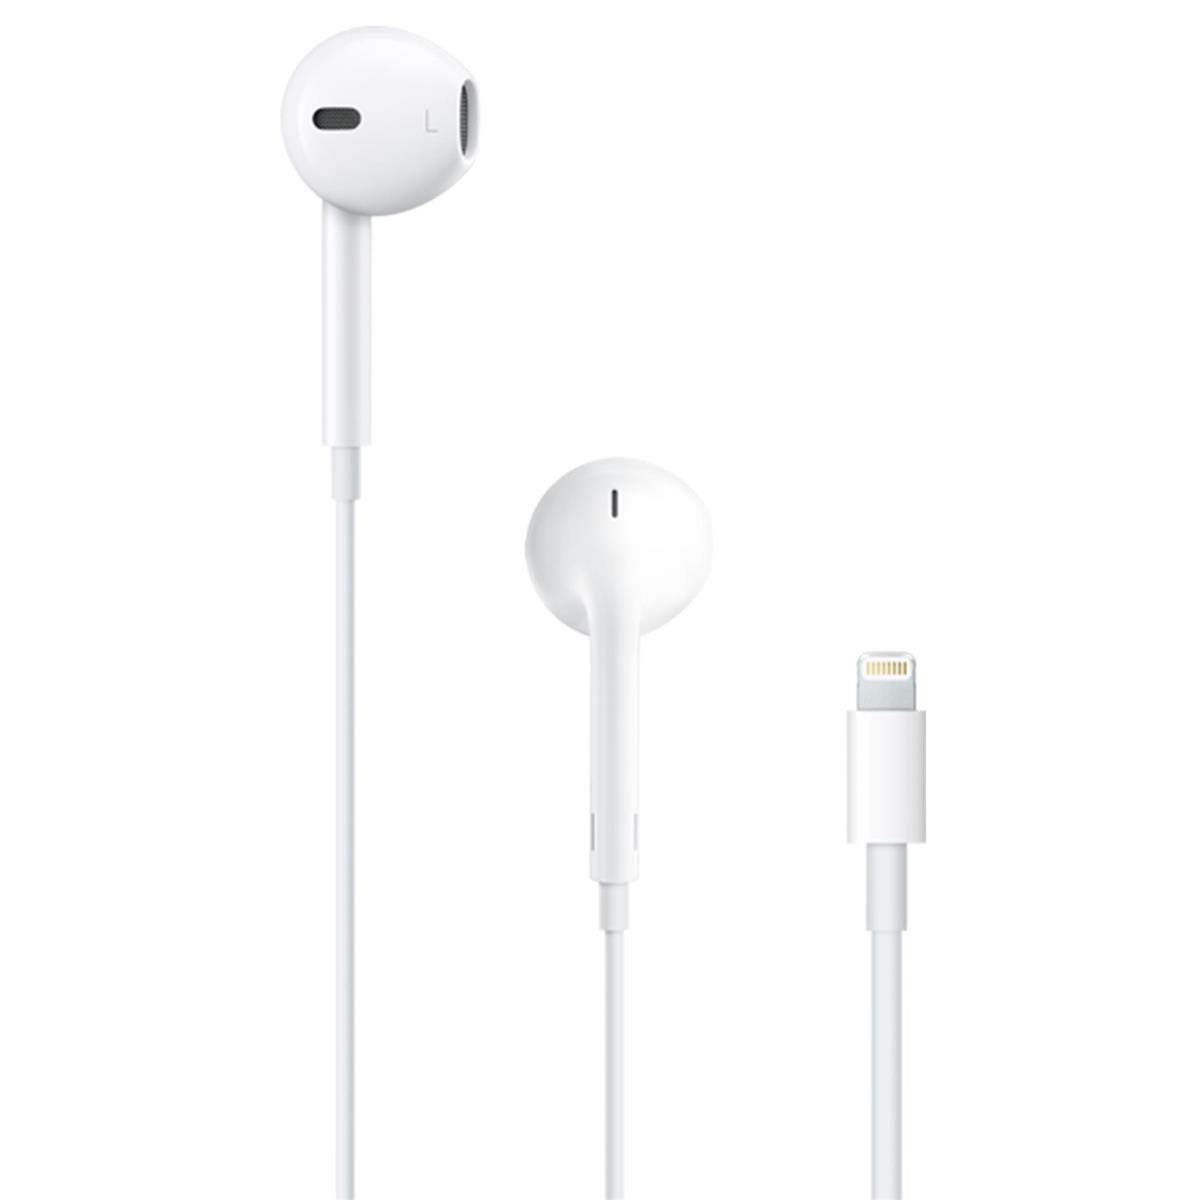 Apple EarPods Headphones with Lightning Connector. Microphone with Built-in Remote to Control Music, Phone Calls, and Volume. Wired Earbuds for iPhone$17.97 @Amazon